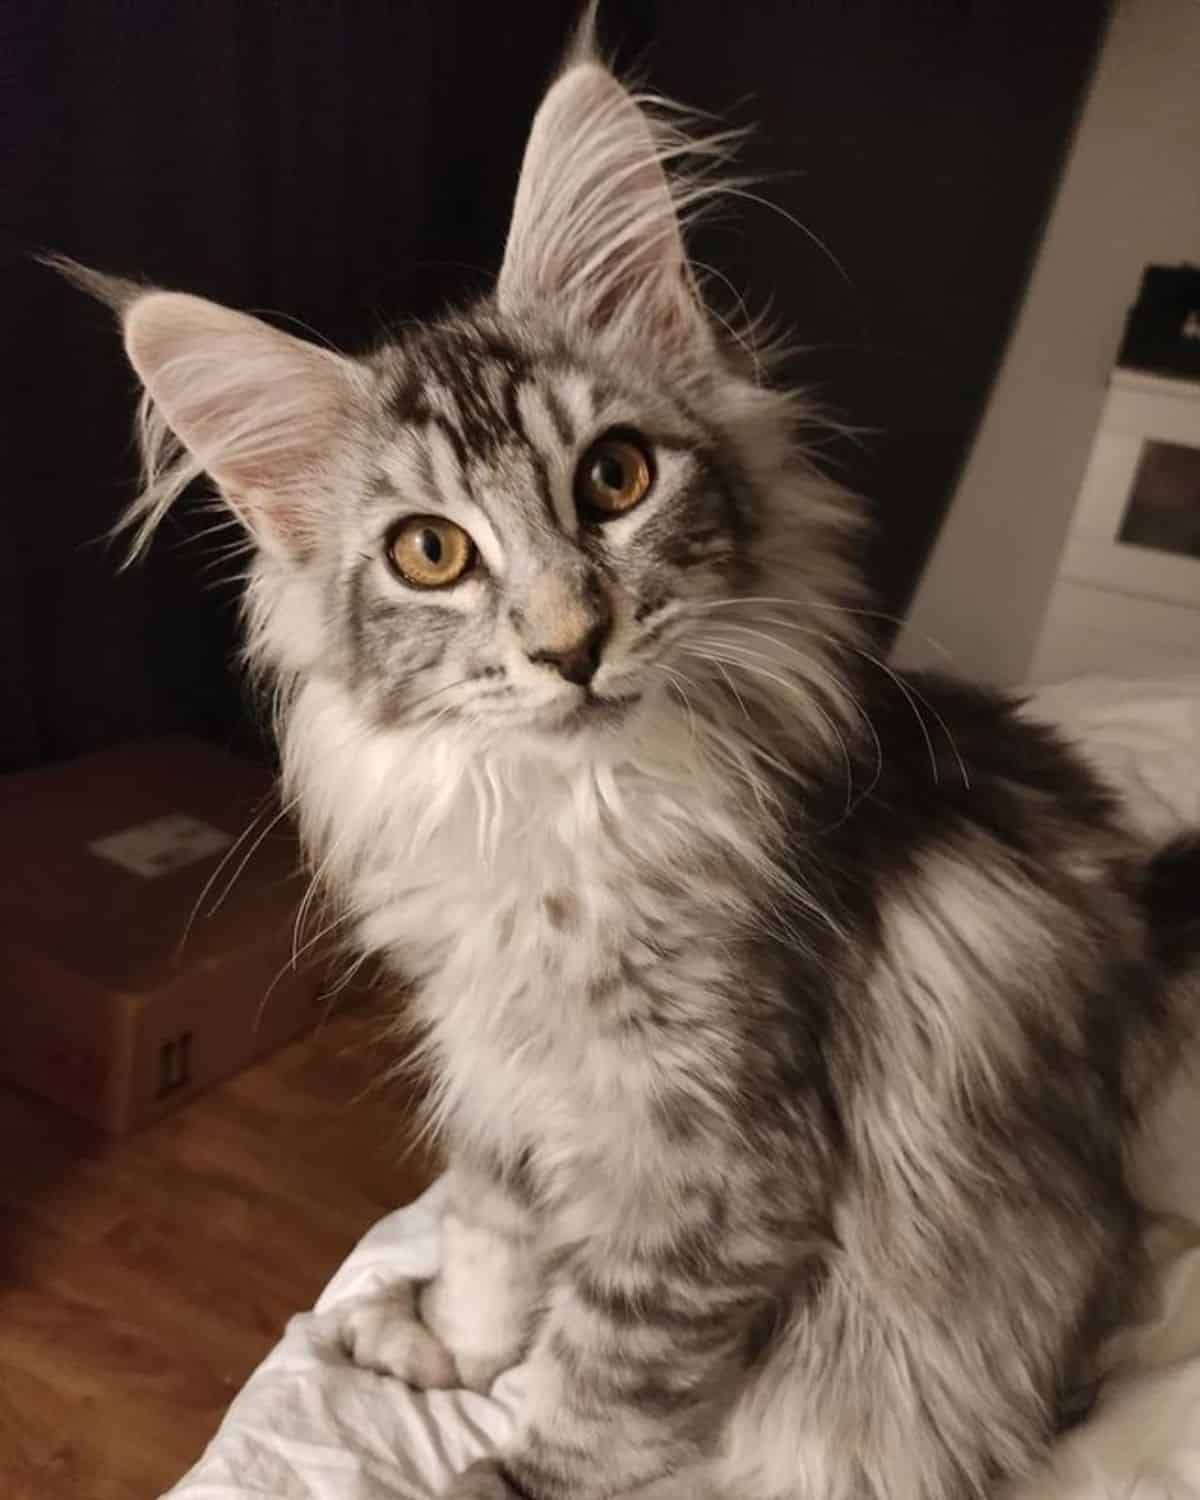 A gray fluffy maine coon sitting on a bed and looking in a camera.